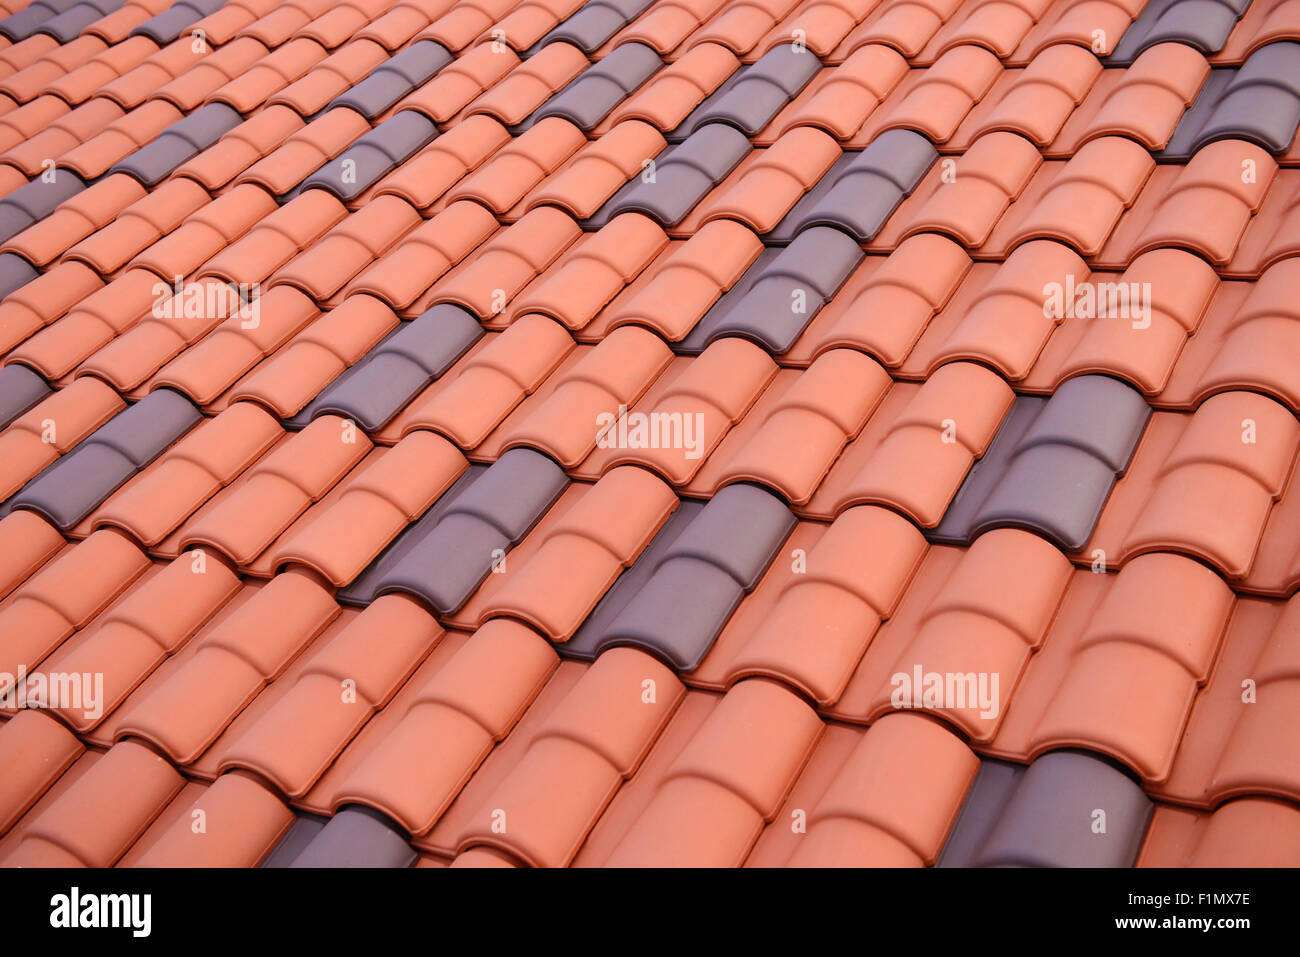 Pattern of red tile roof Stock Photo